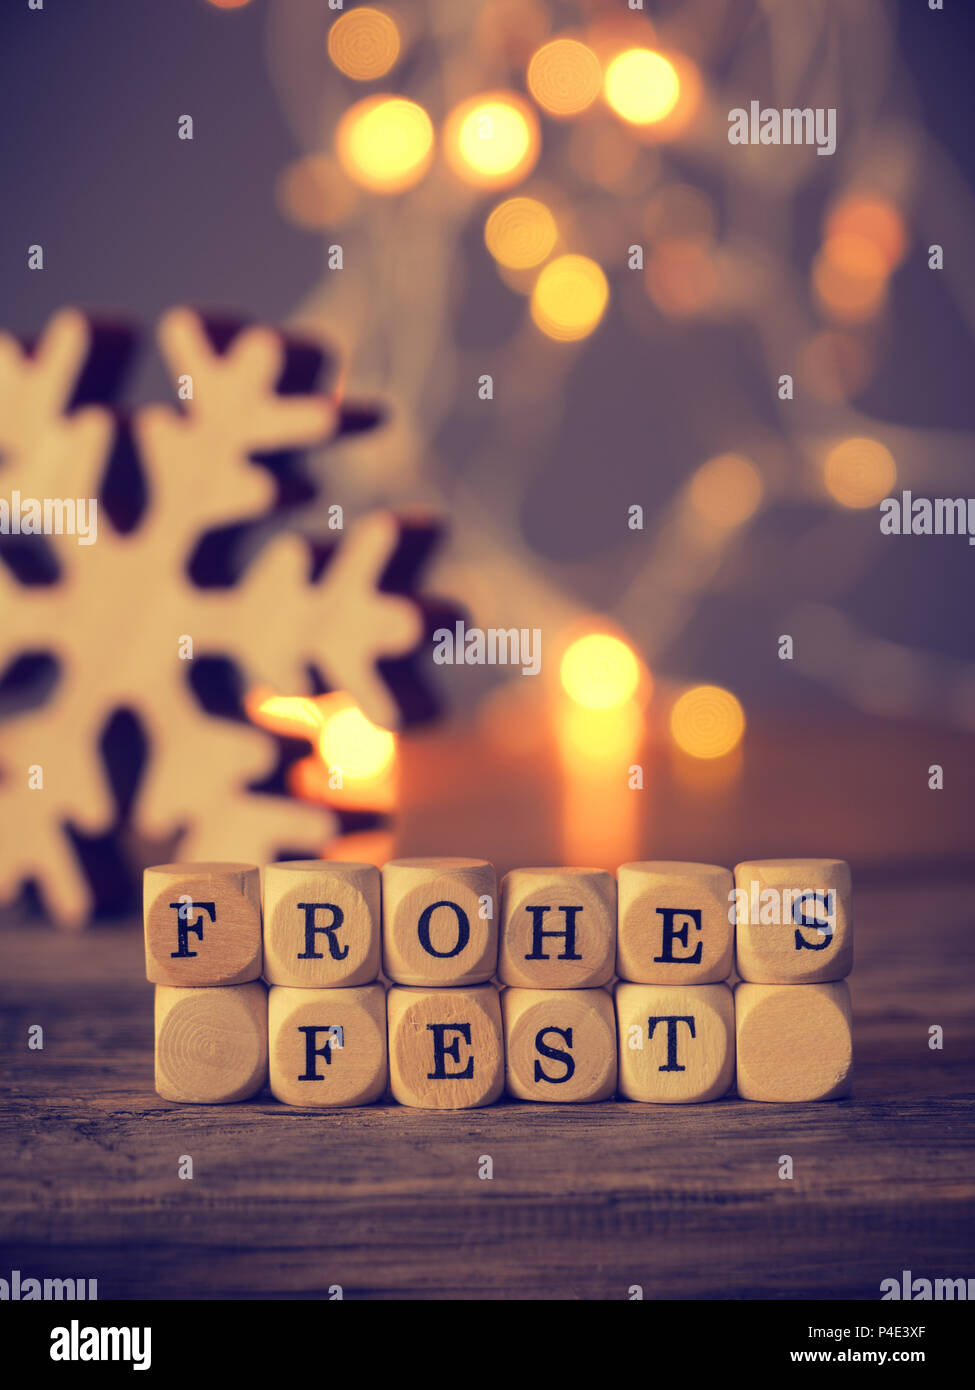 German Merry Christmas on wooden dices with blurred lights and decoration Stock Photo